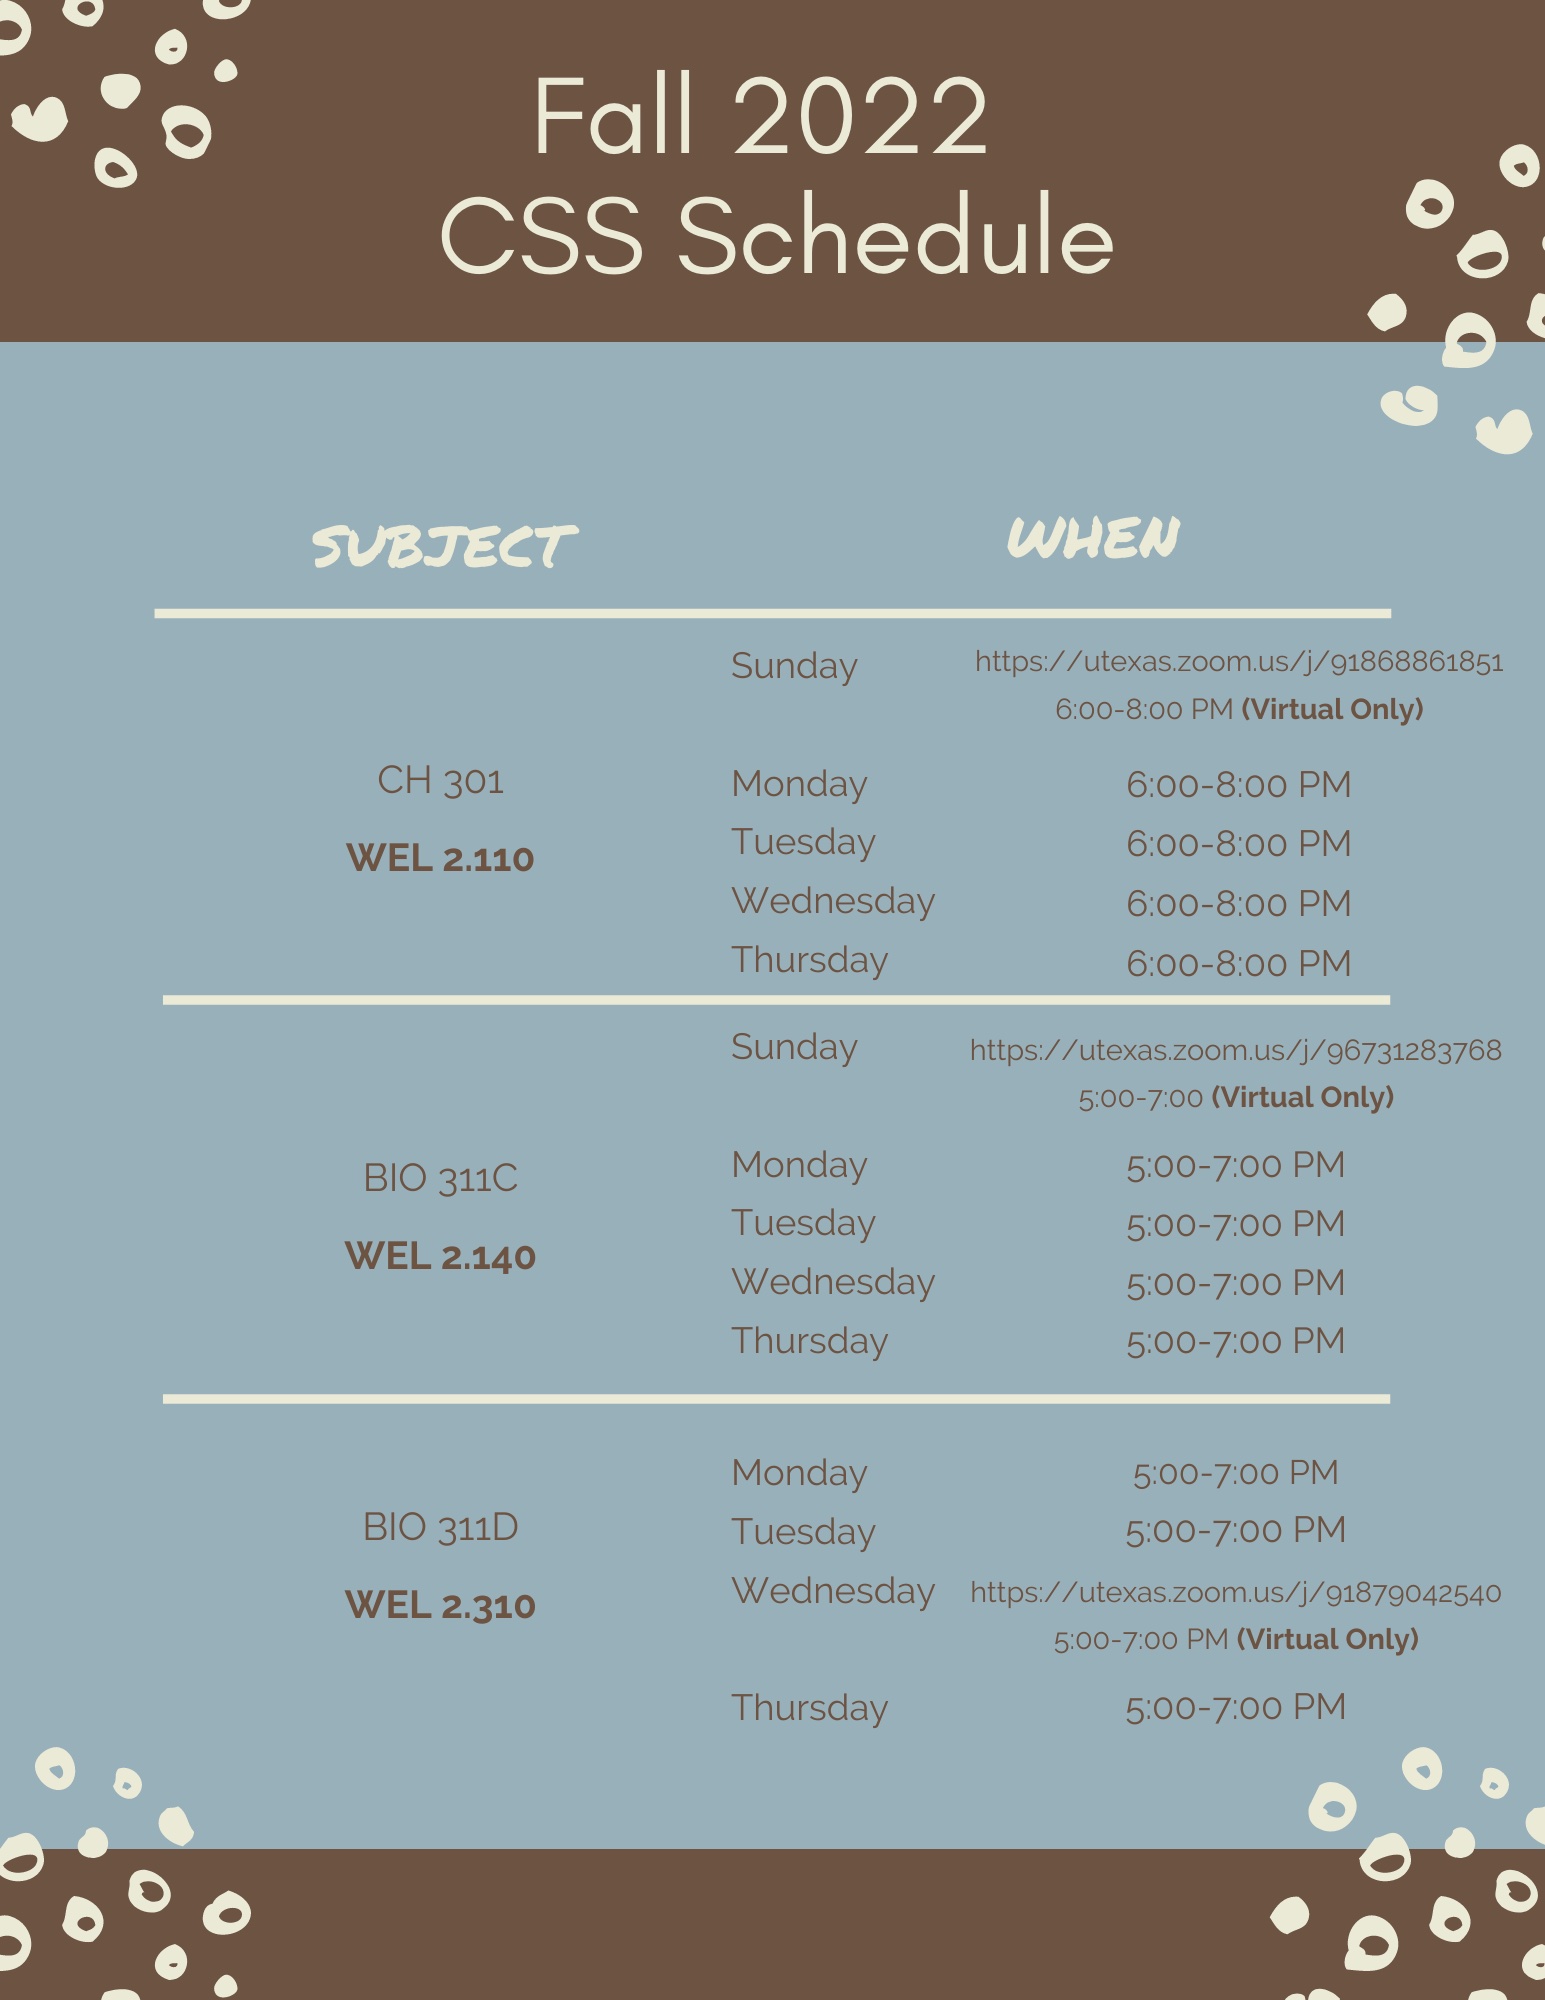 Fall 22 CSS Schedule